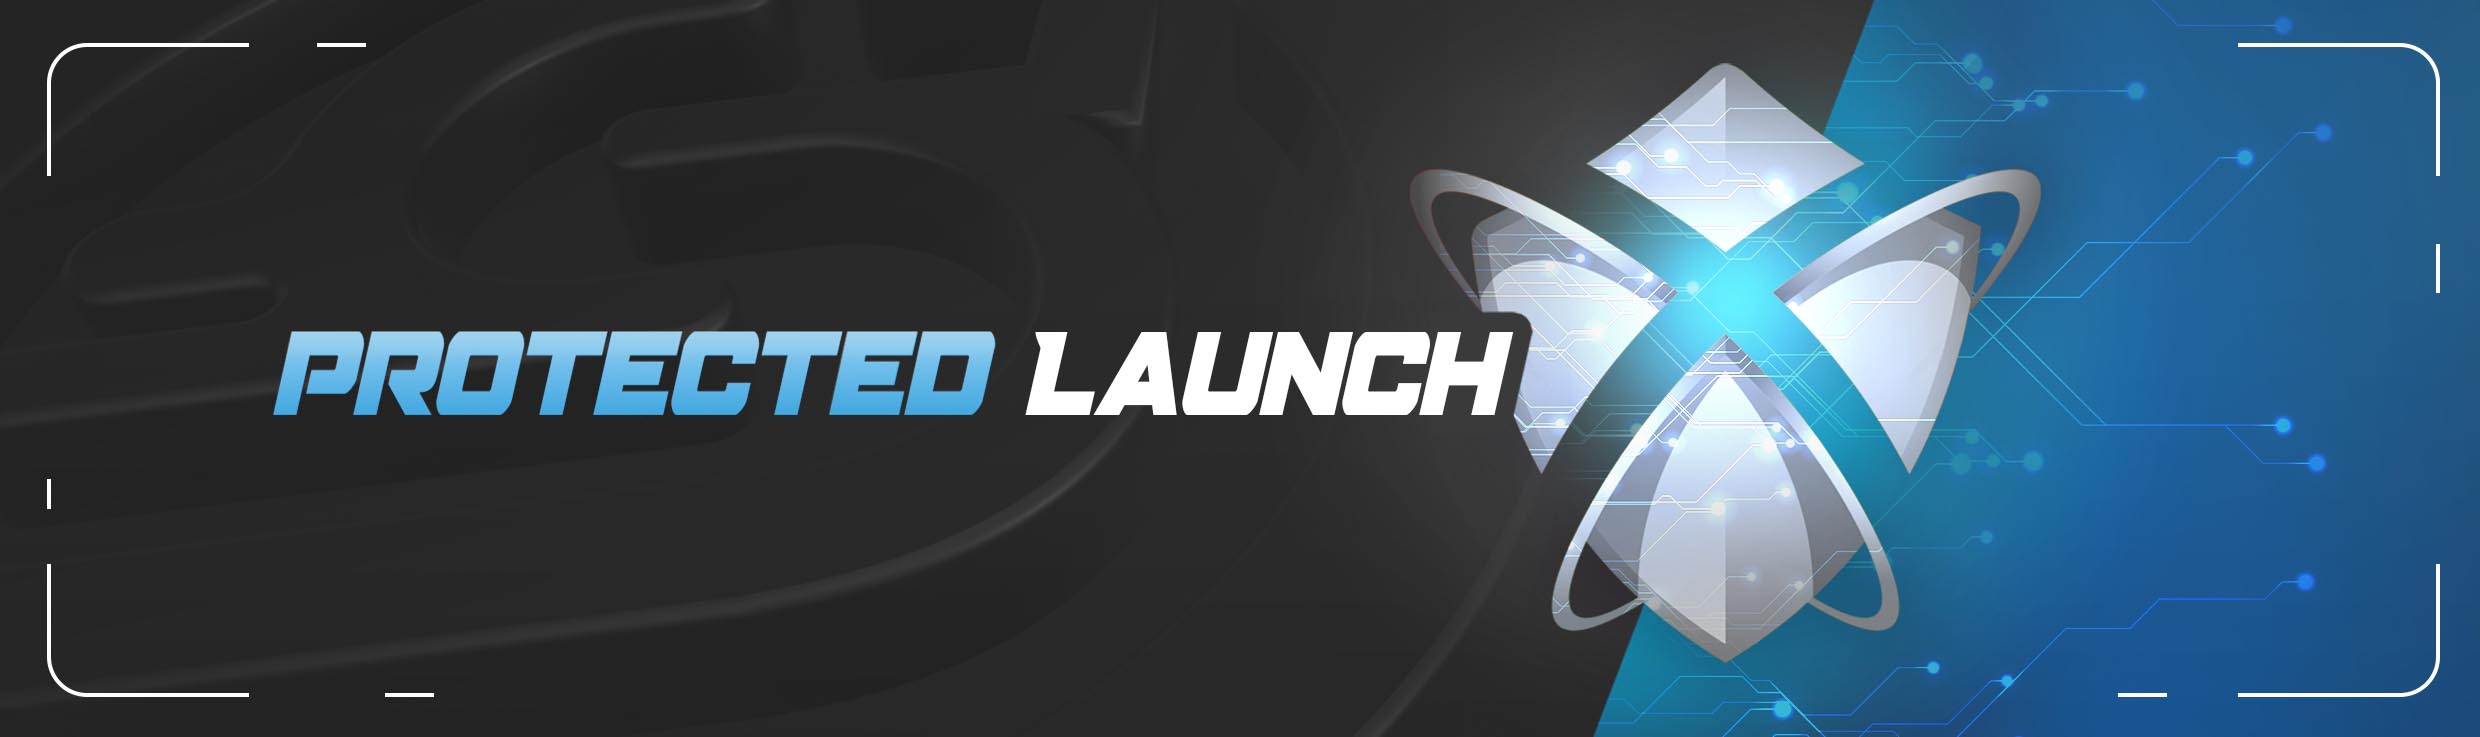 banner protected launch